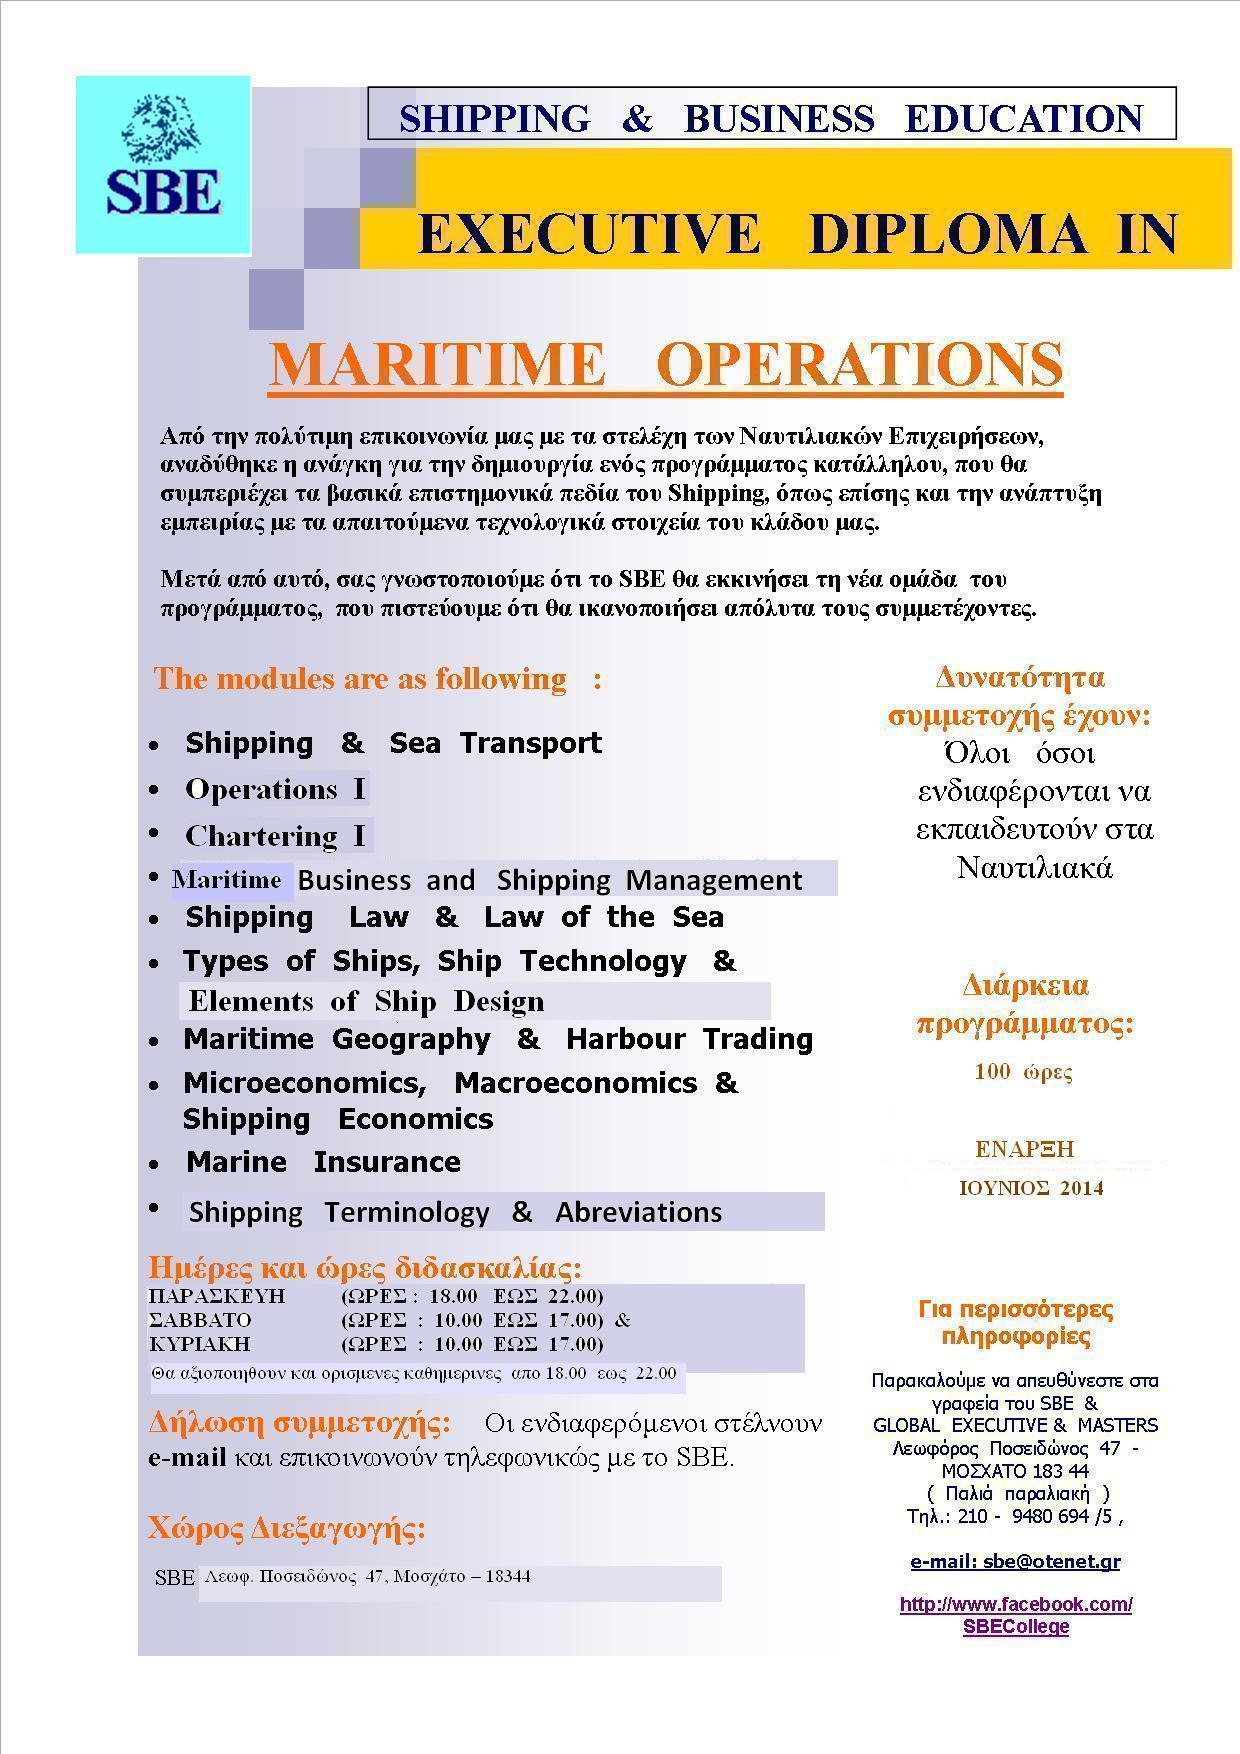 SBE – Executive Diploma in Maritime Operations